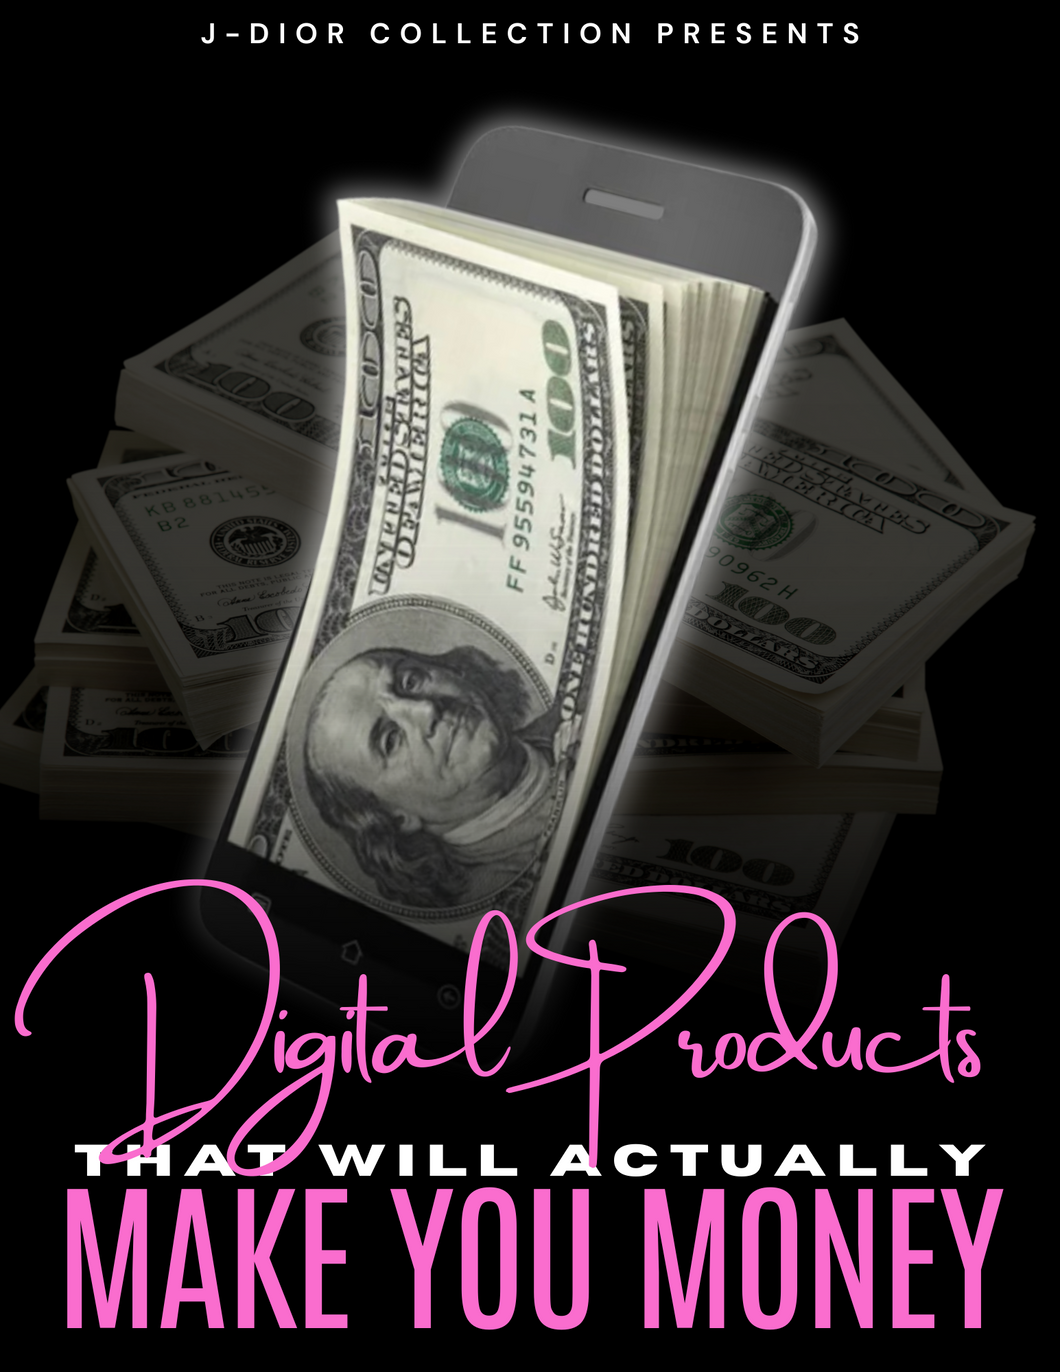 DIGITAL PRODUCTS THAT WILL ACTUALLY MAKE YOU MONEY